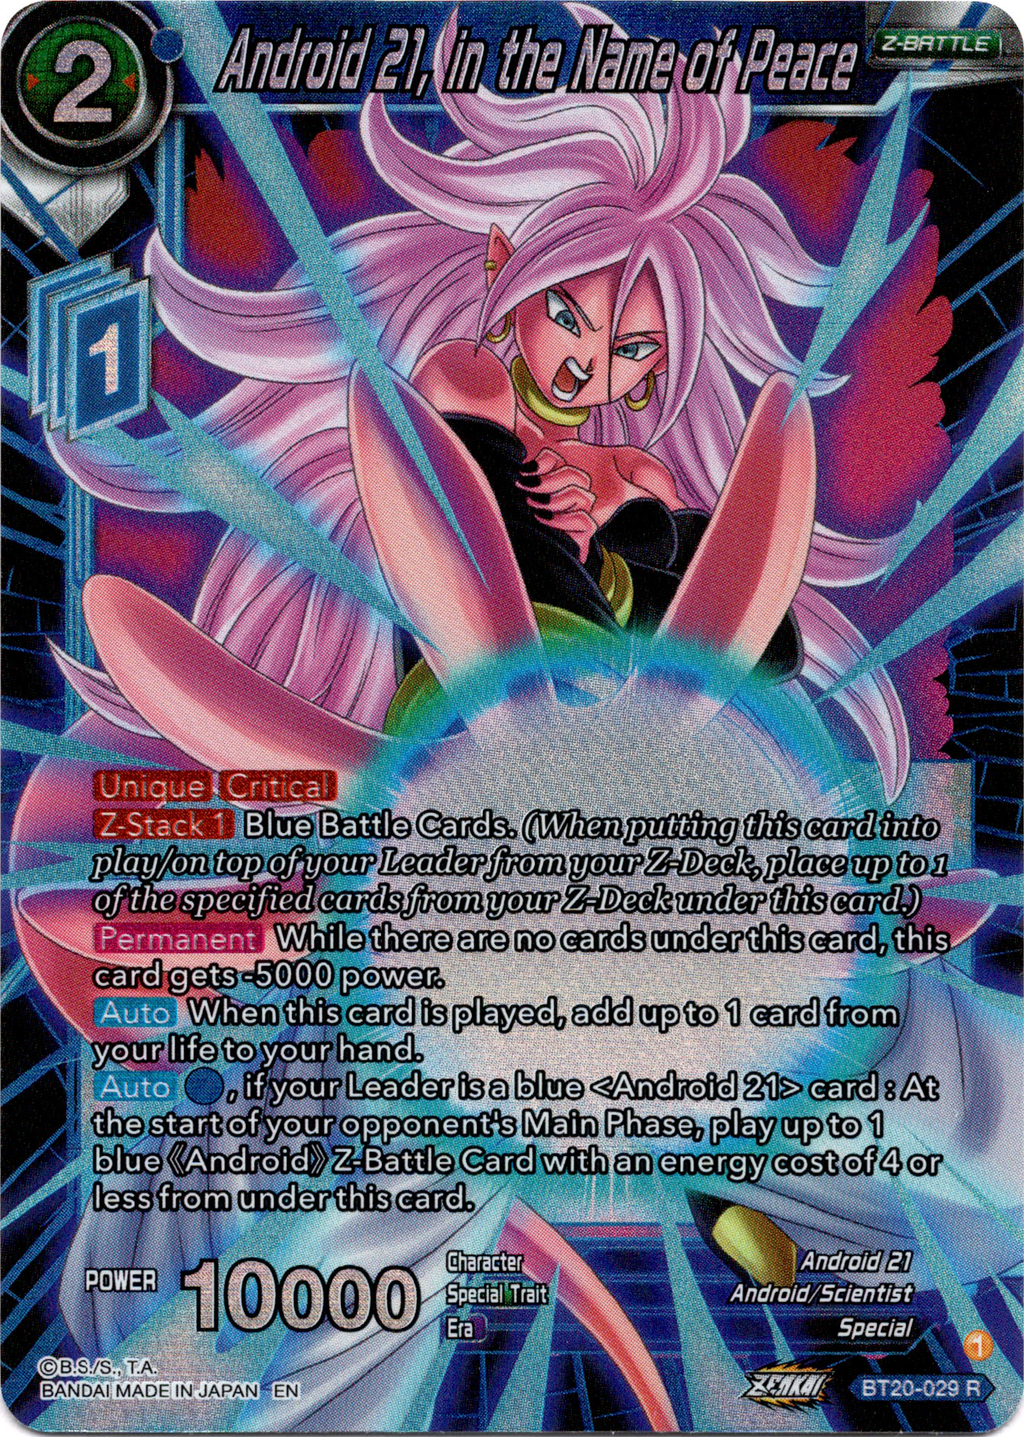 Android 20, Vengeful Alliance - BT20-078 C - Power Absorbed – Card Cavern  Trading Cards, LLC